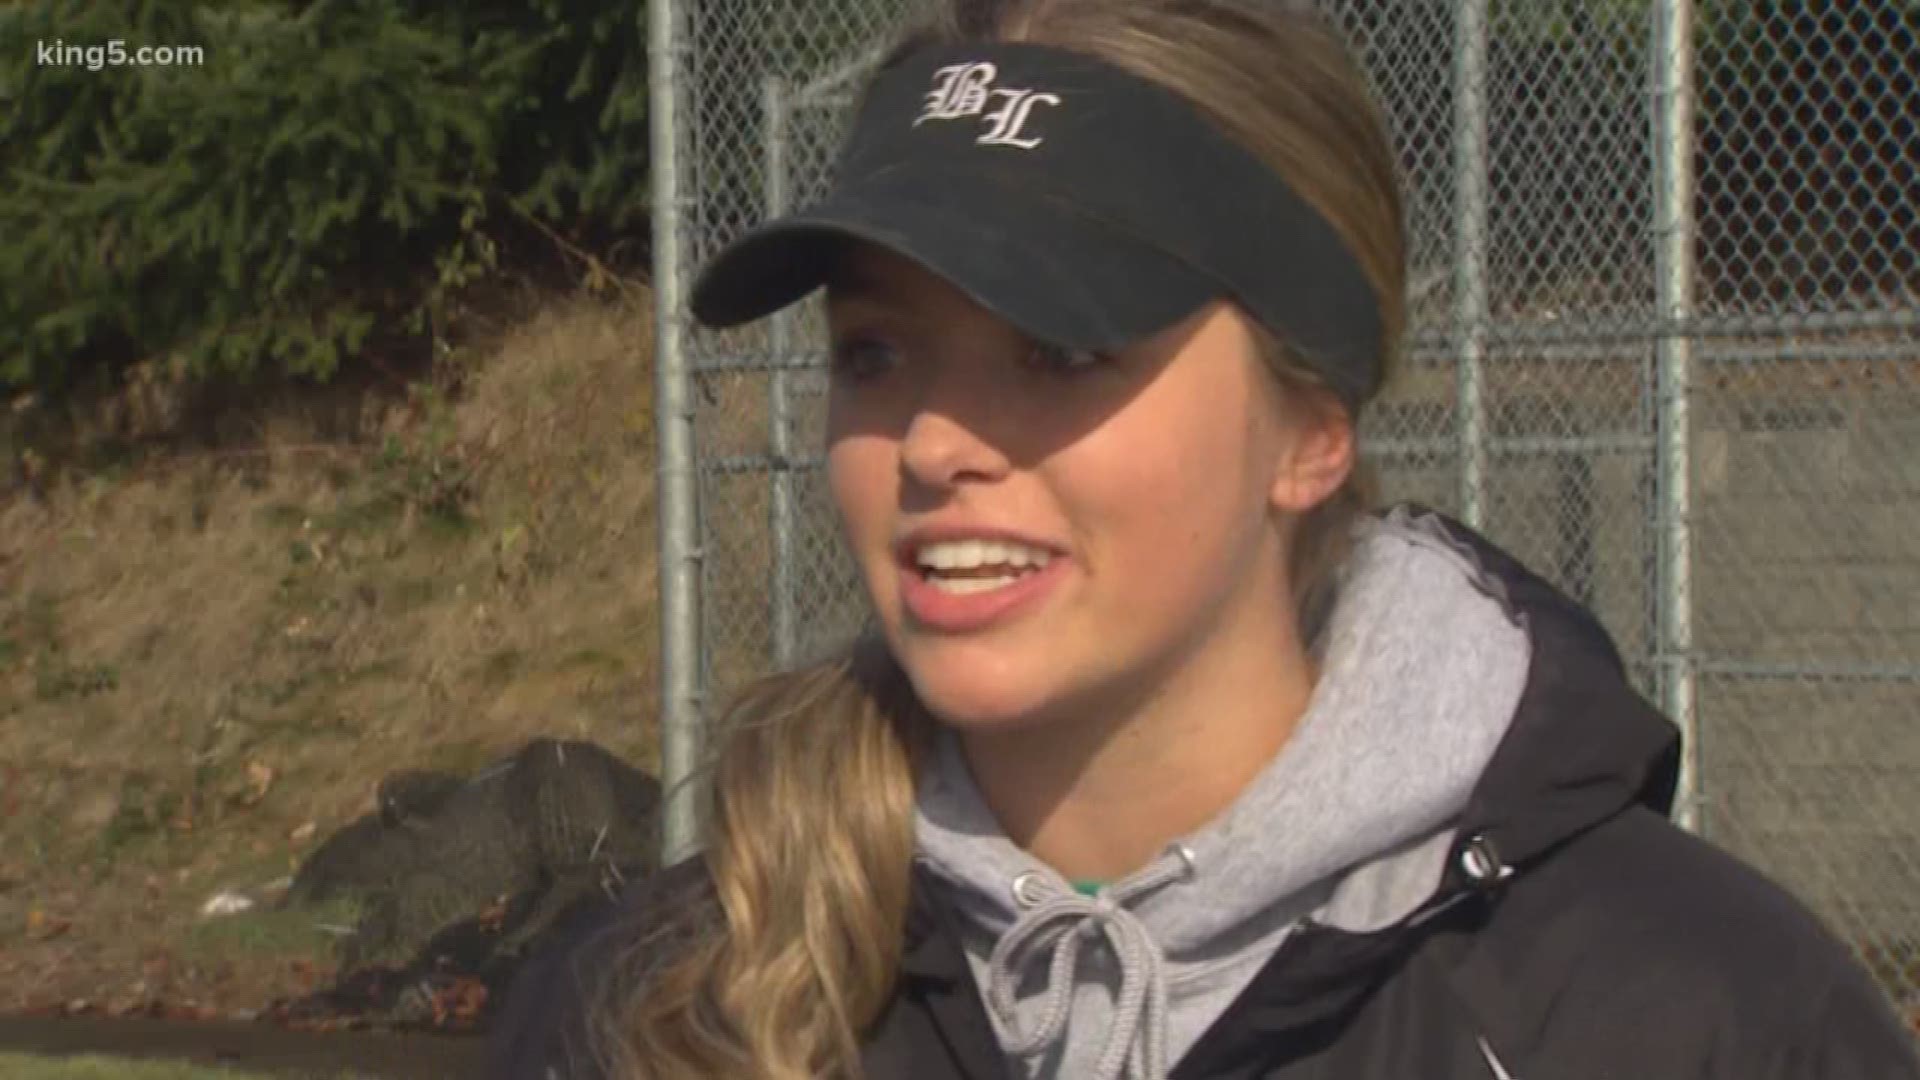 Bonney Lake's Brooke Nelson may just be the best hitter and pitcher in Washington state high school softball history. Now she's taking her talents to her dream team at the University of Washington. KING 5's Chris Egan has this week's Prep Zone.